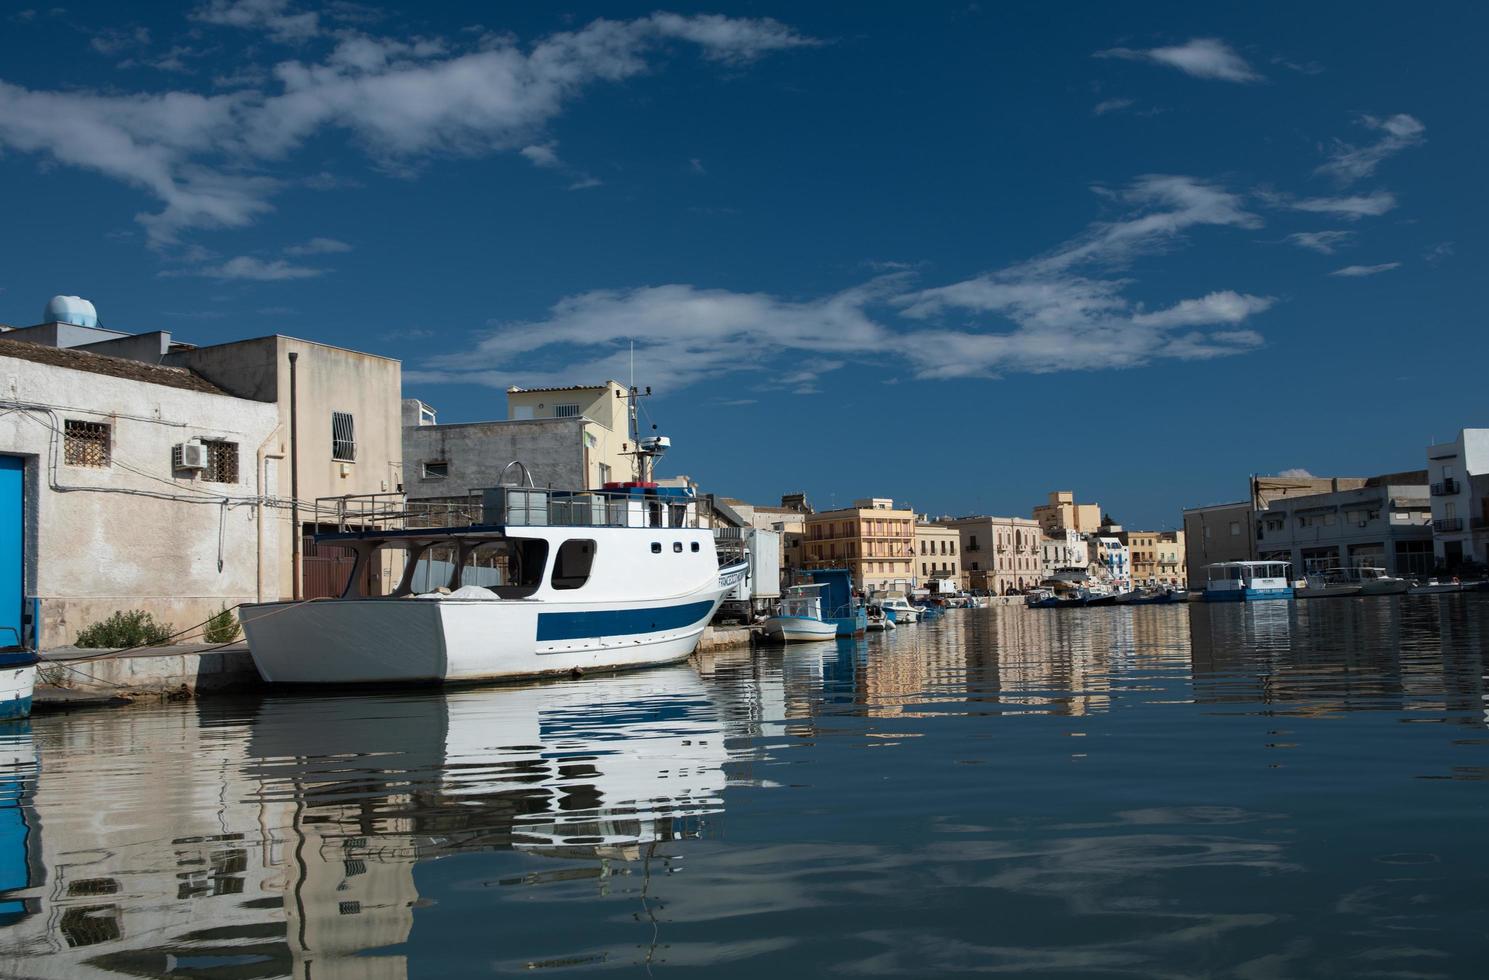 The banks of the Mazaro River in Mazara del Vallo, Italy. The houses are reflected in the water. A boat is moored on the shore. The sky and clouds are reflected in the waves. photo